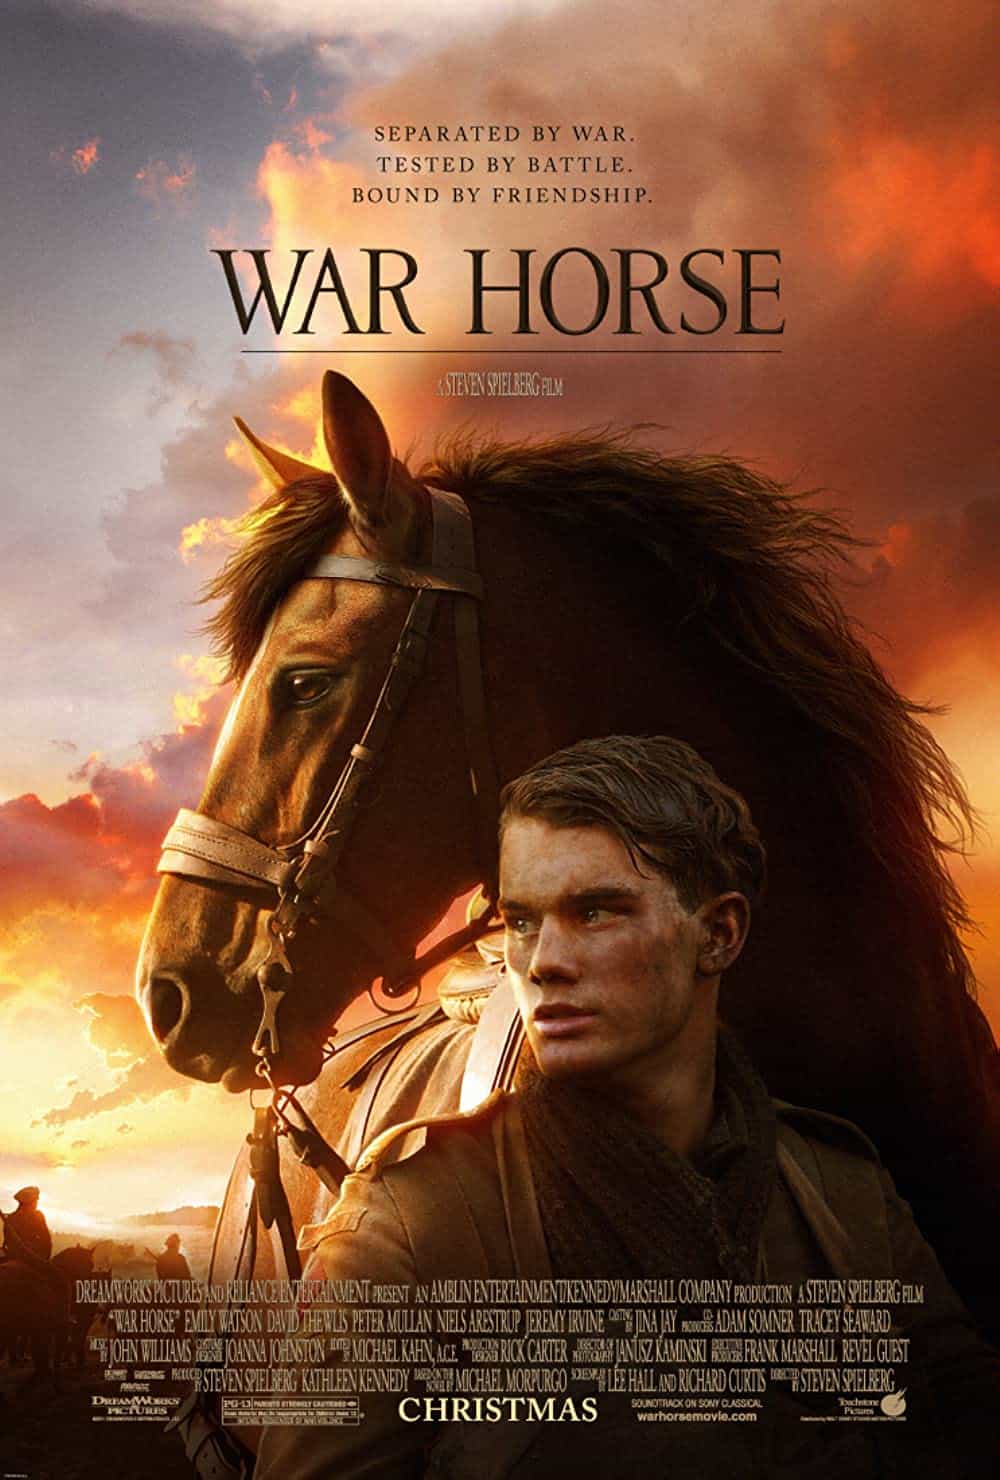 25 Best Horse Movies You Should Totally Watch – War Horse